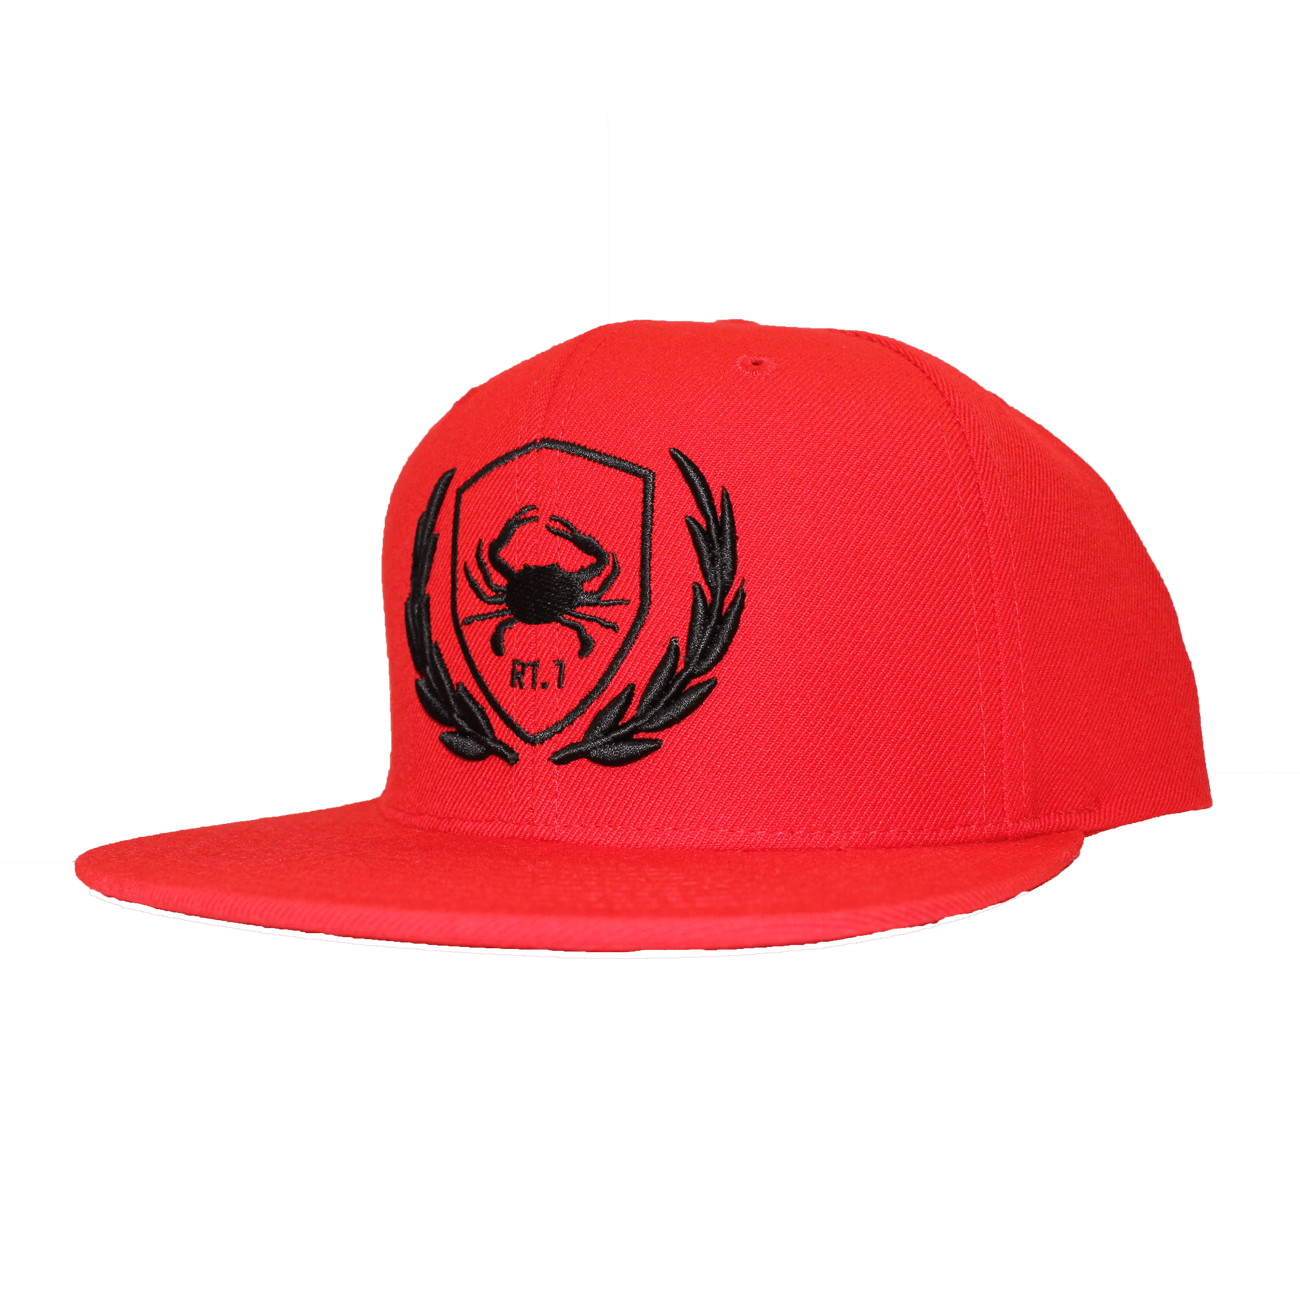 Rt. 1 Crest (Red) / Canvas Snapback Hat - Route One Apparel